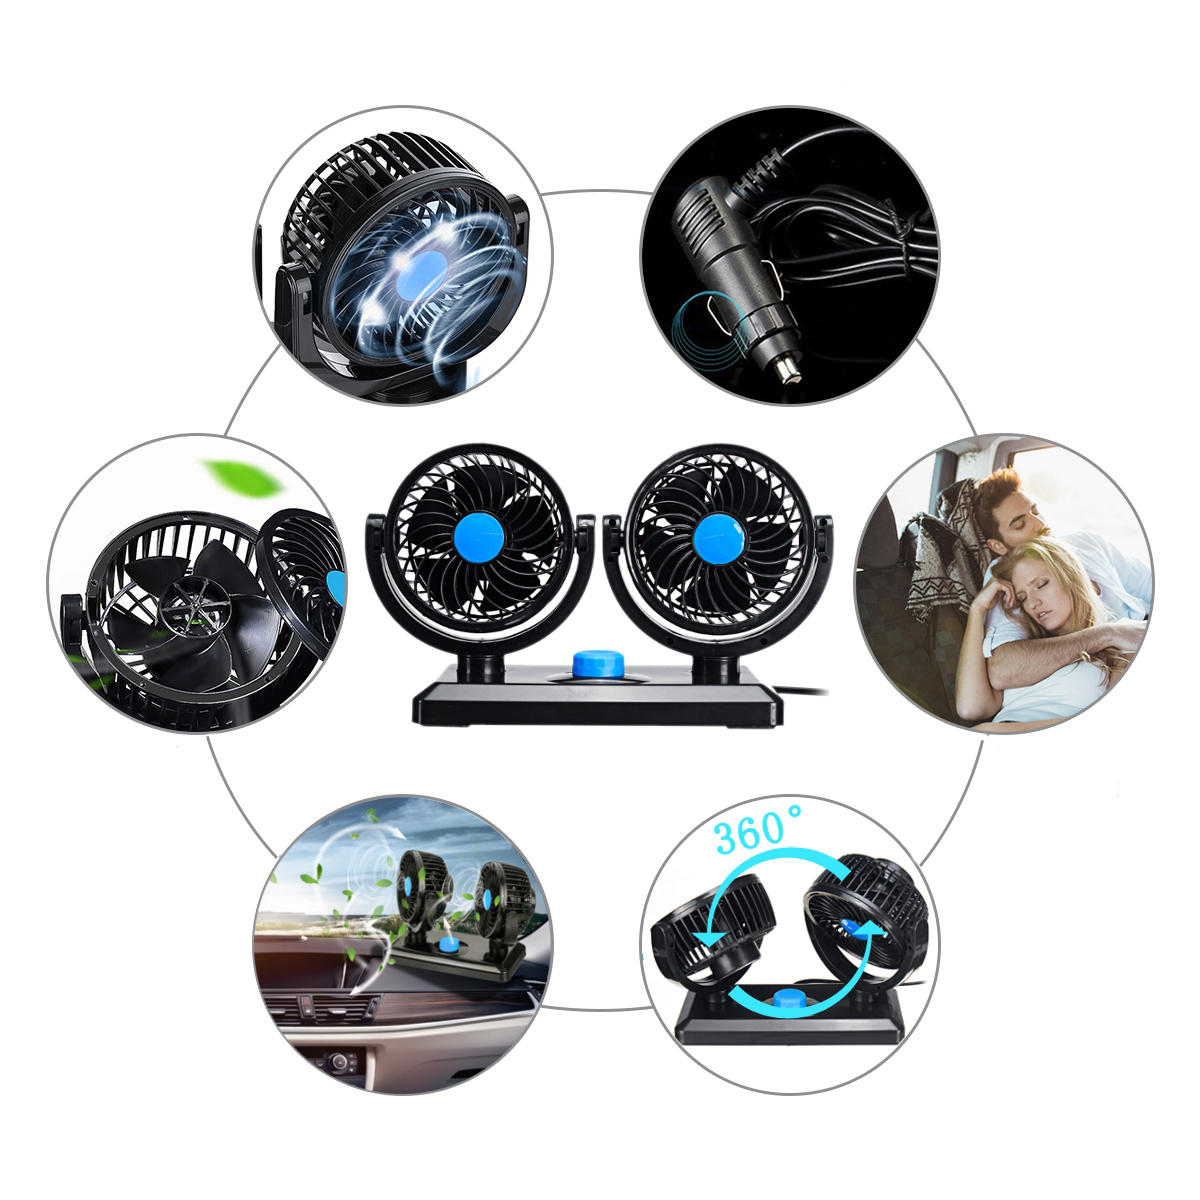 12V/24V 360 All-Round Mini Auto Air Cooling Dual Car Fan Portable Adjustable Low Noise